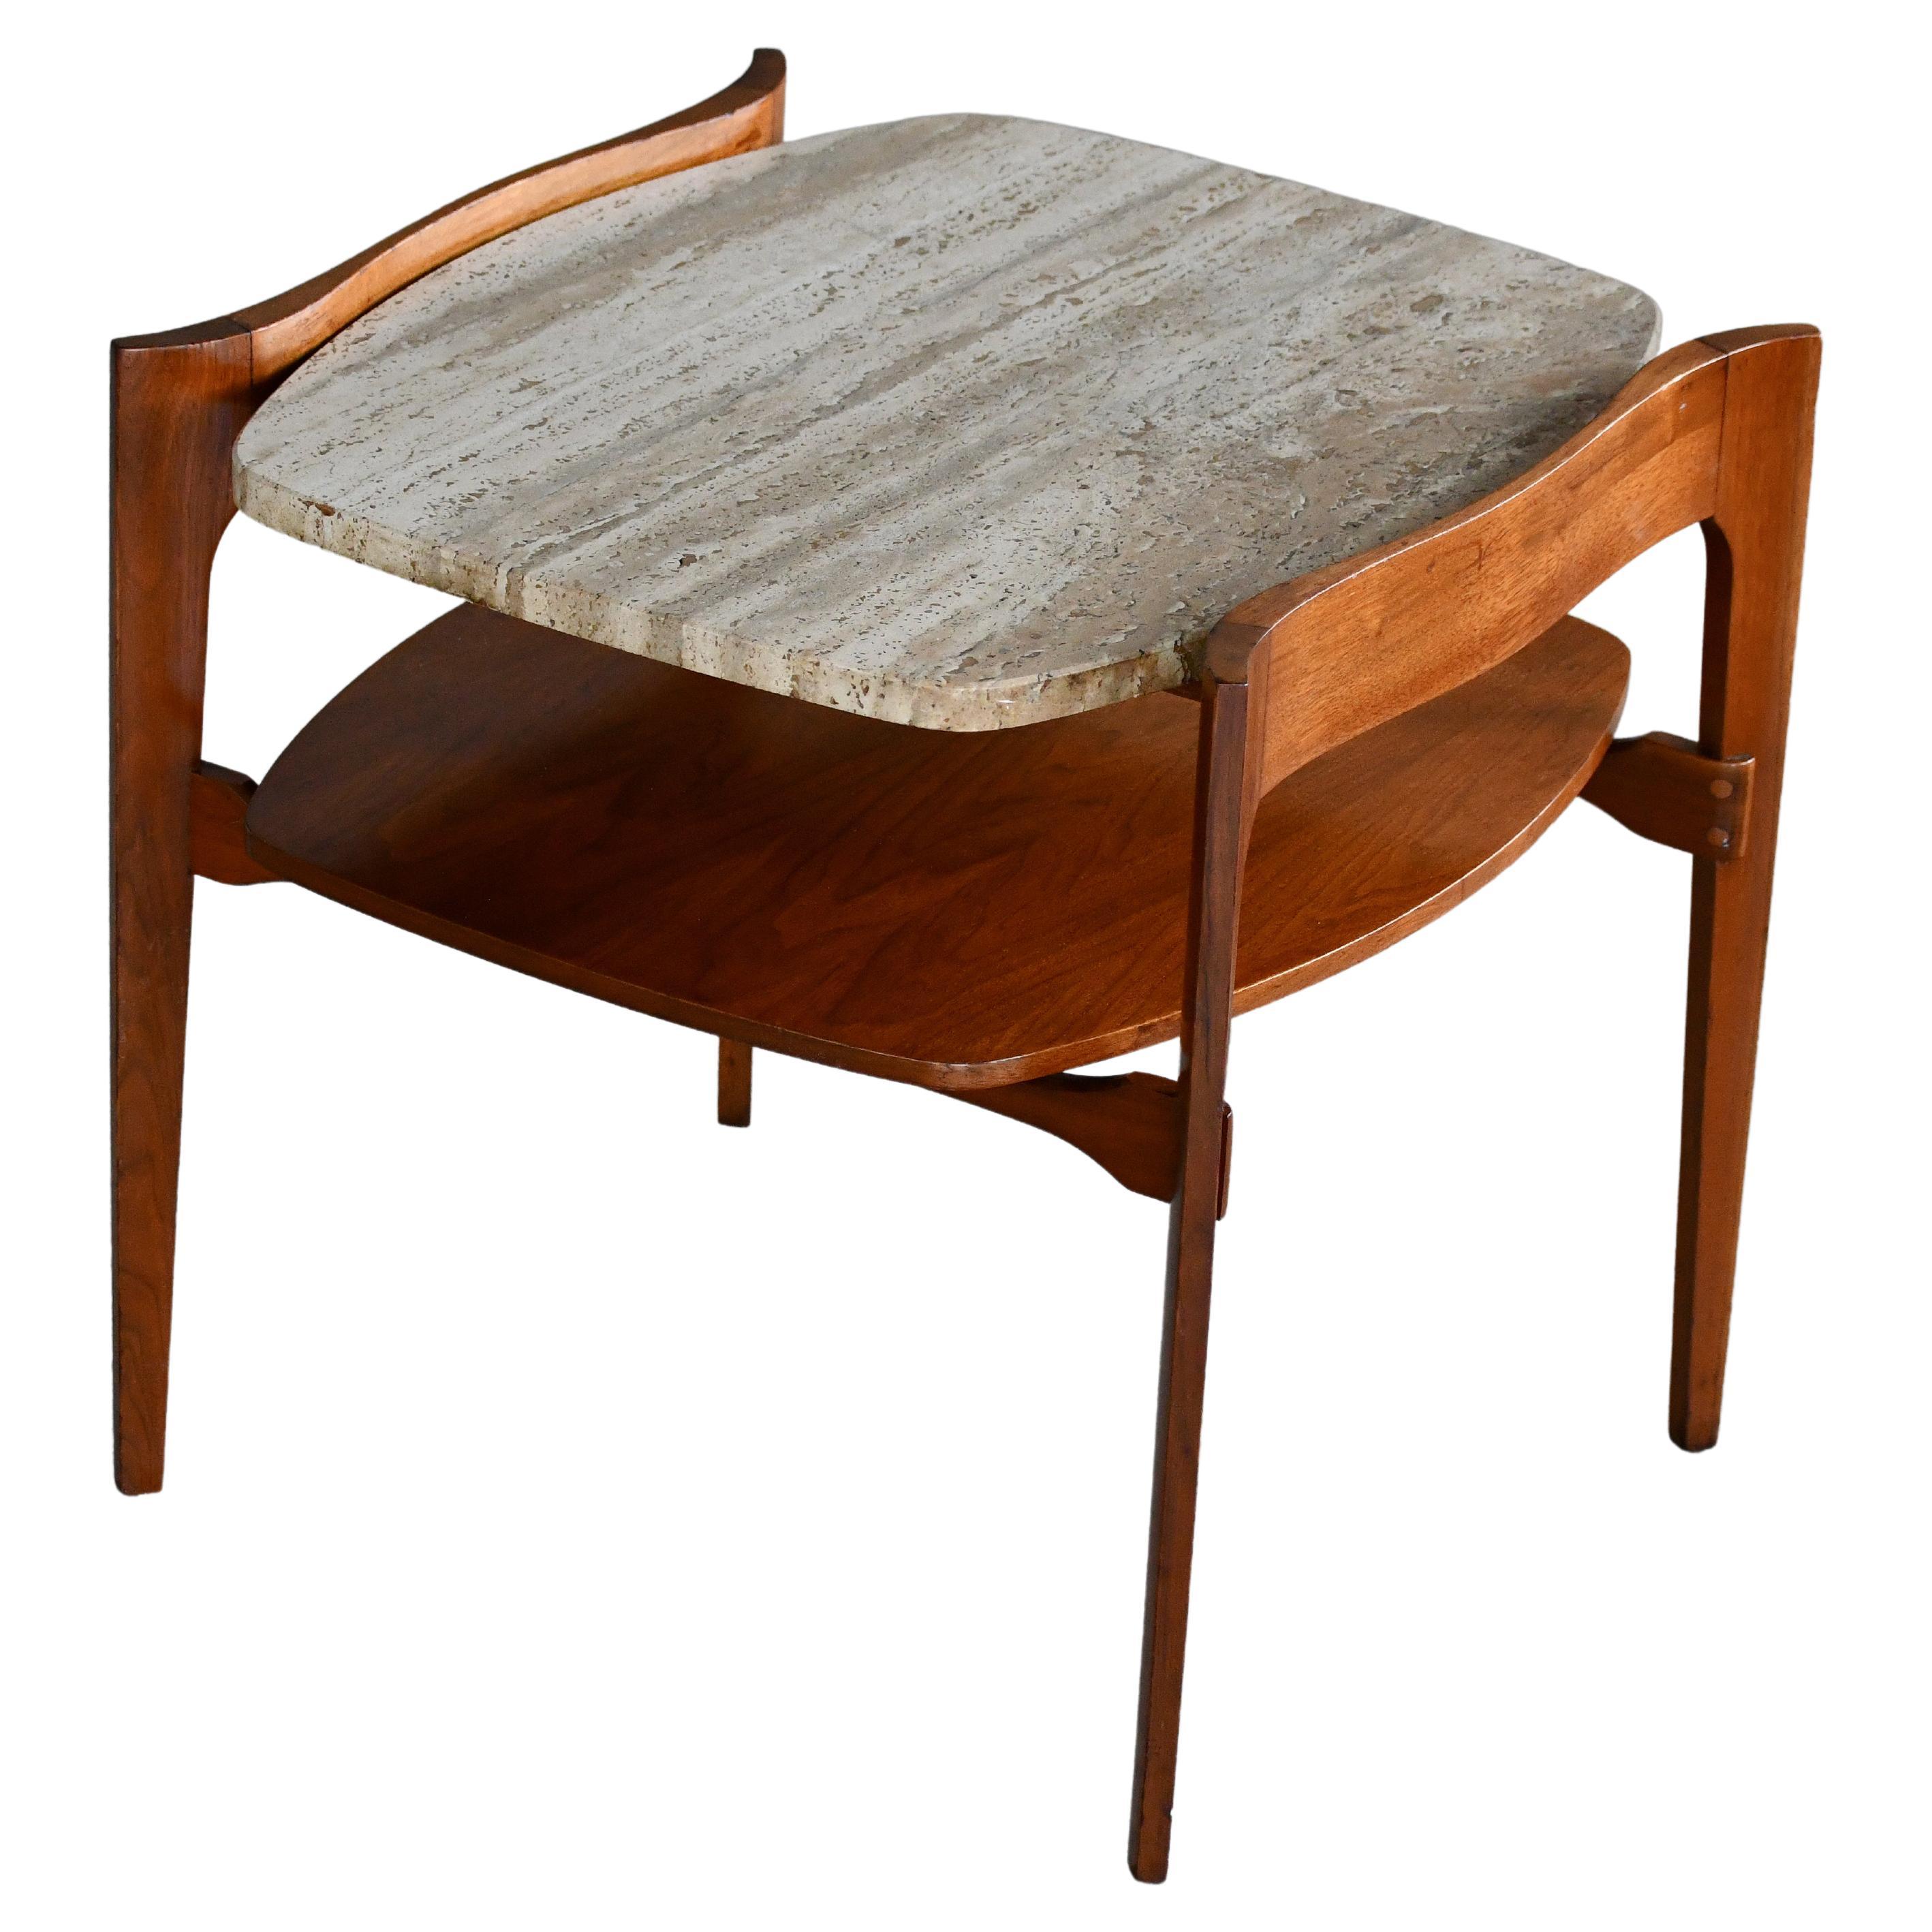 Bertha Schaefer Midcentury End or Side Table in Walnut with Travertine Top  For Sale